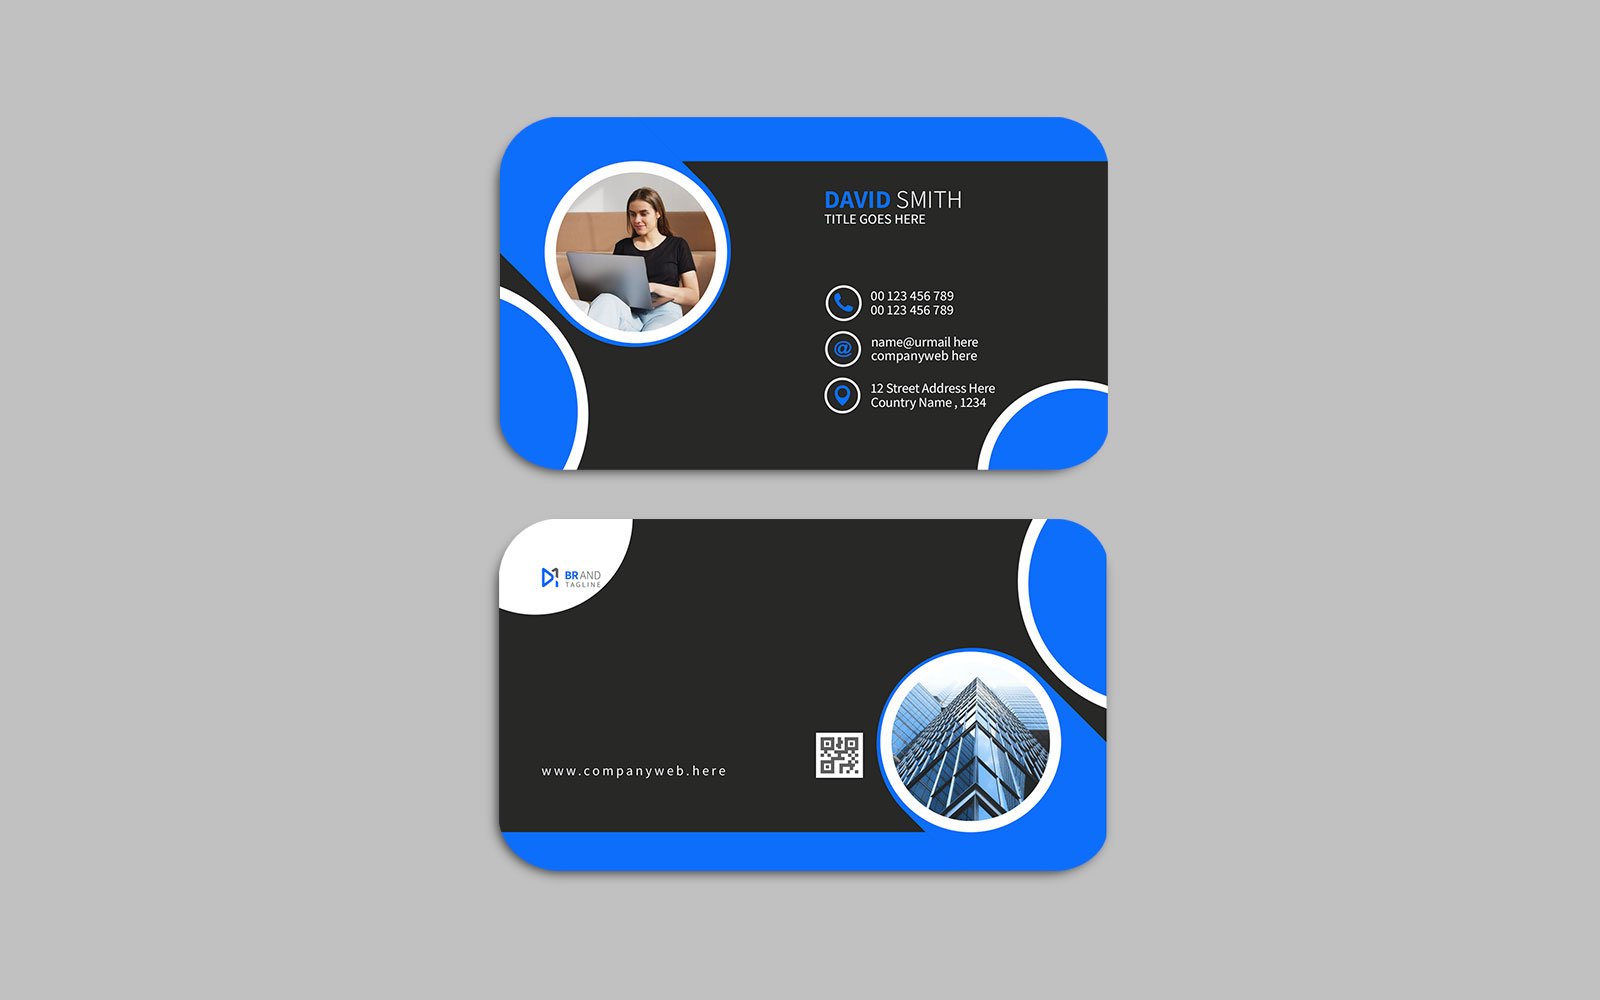 Template #382600 Id Visiting Webdesign Template - Logo template Preview